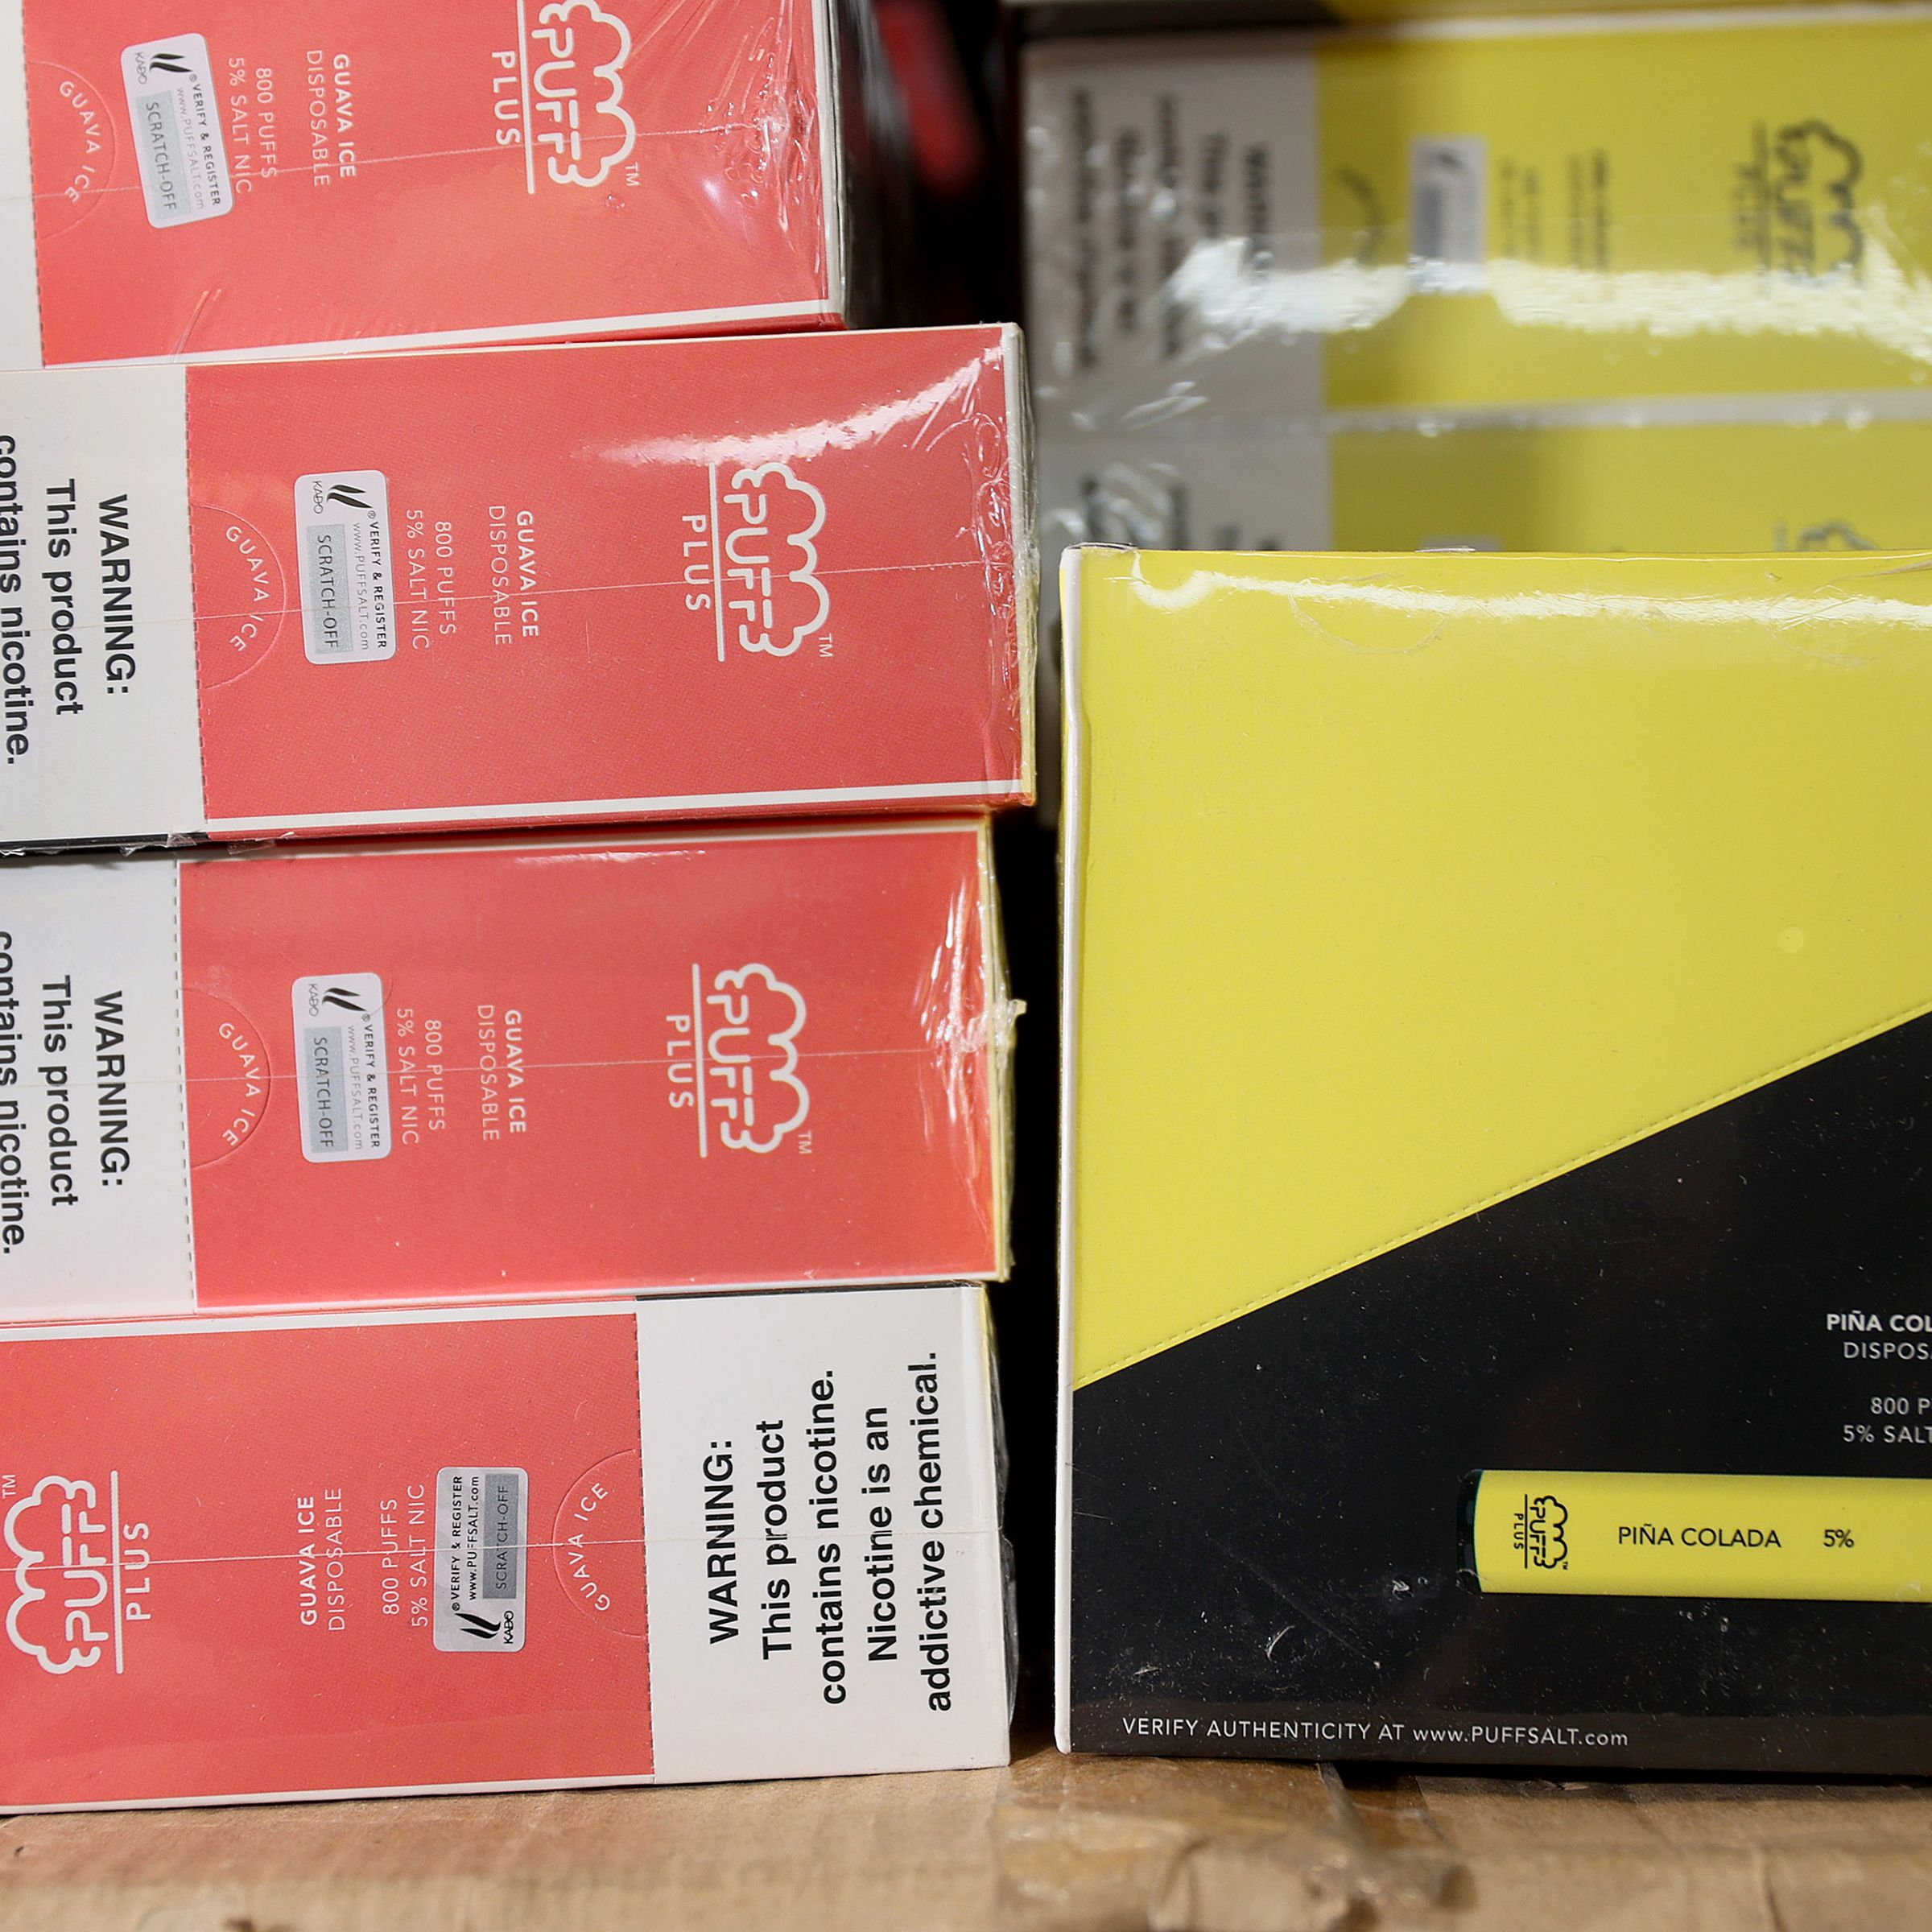 Pink and yellow boxes of Puff Bar e-cigarettes.